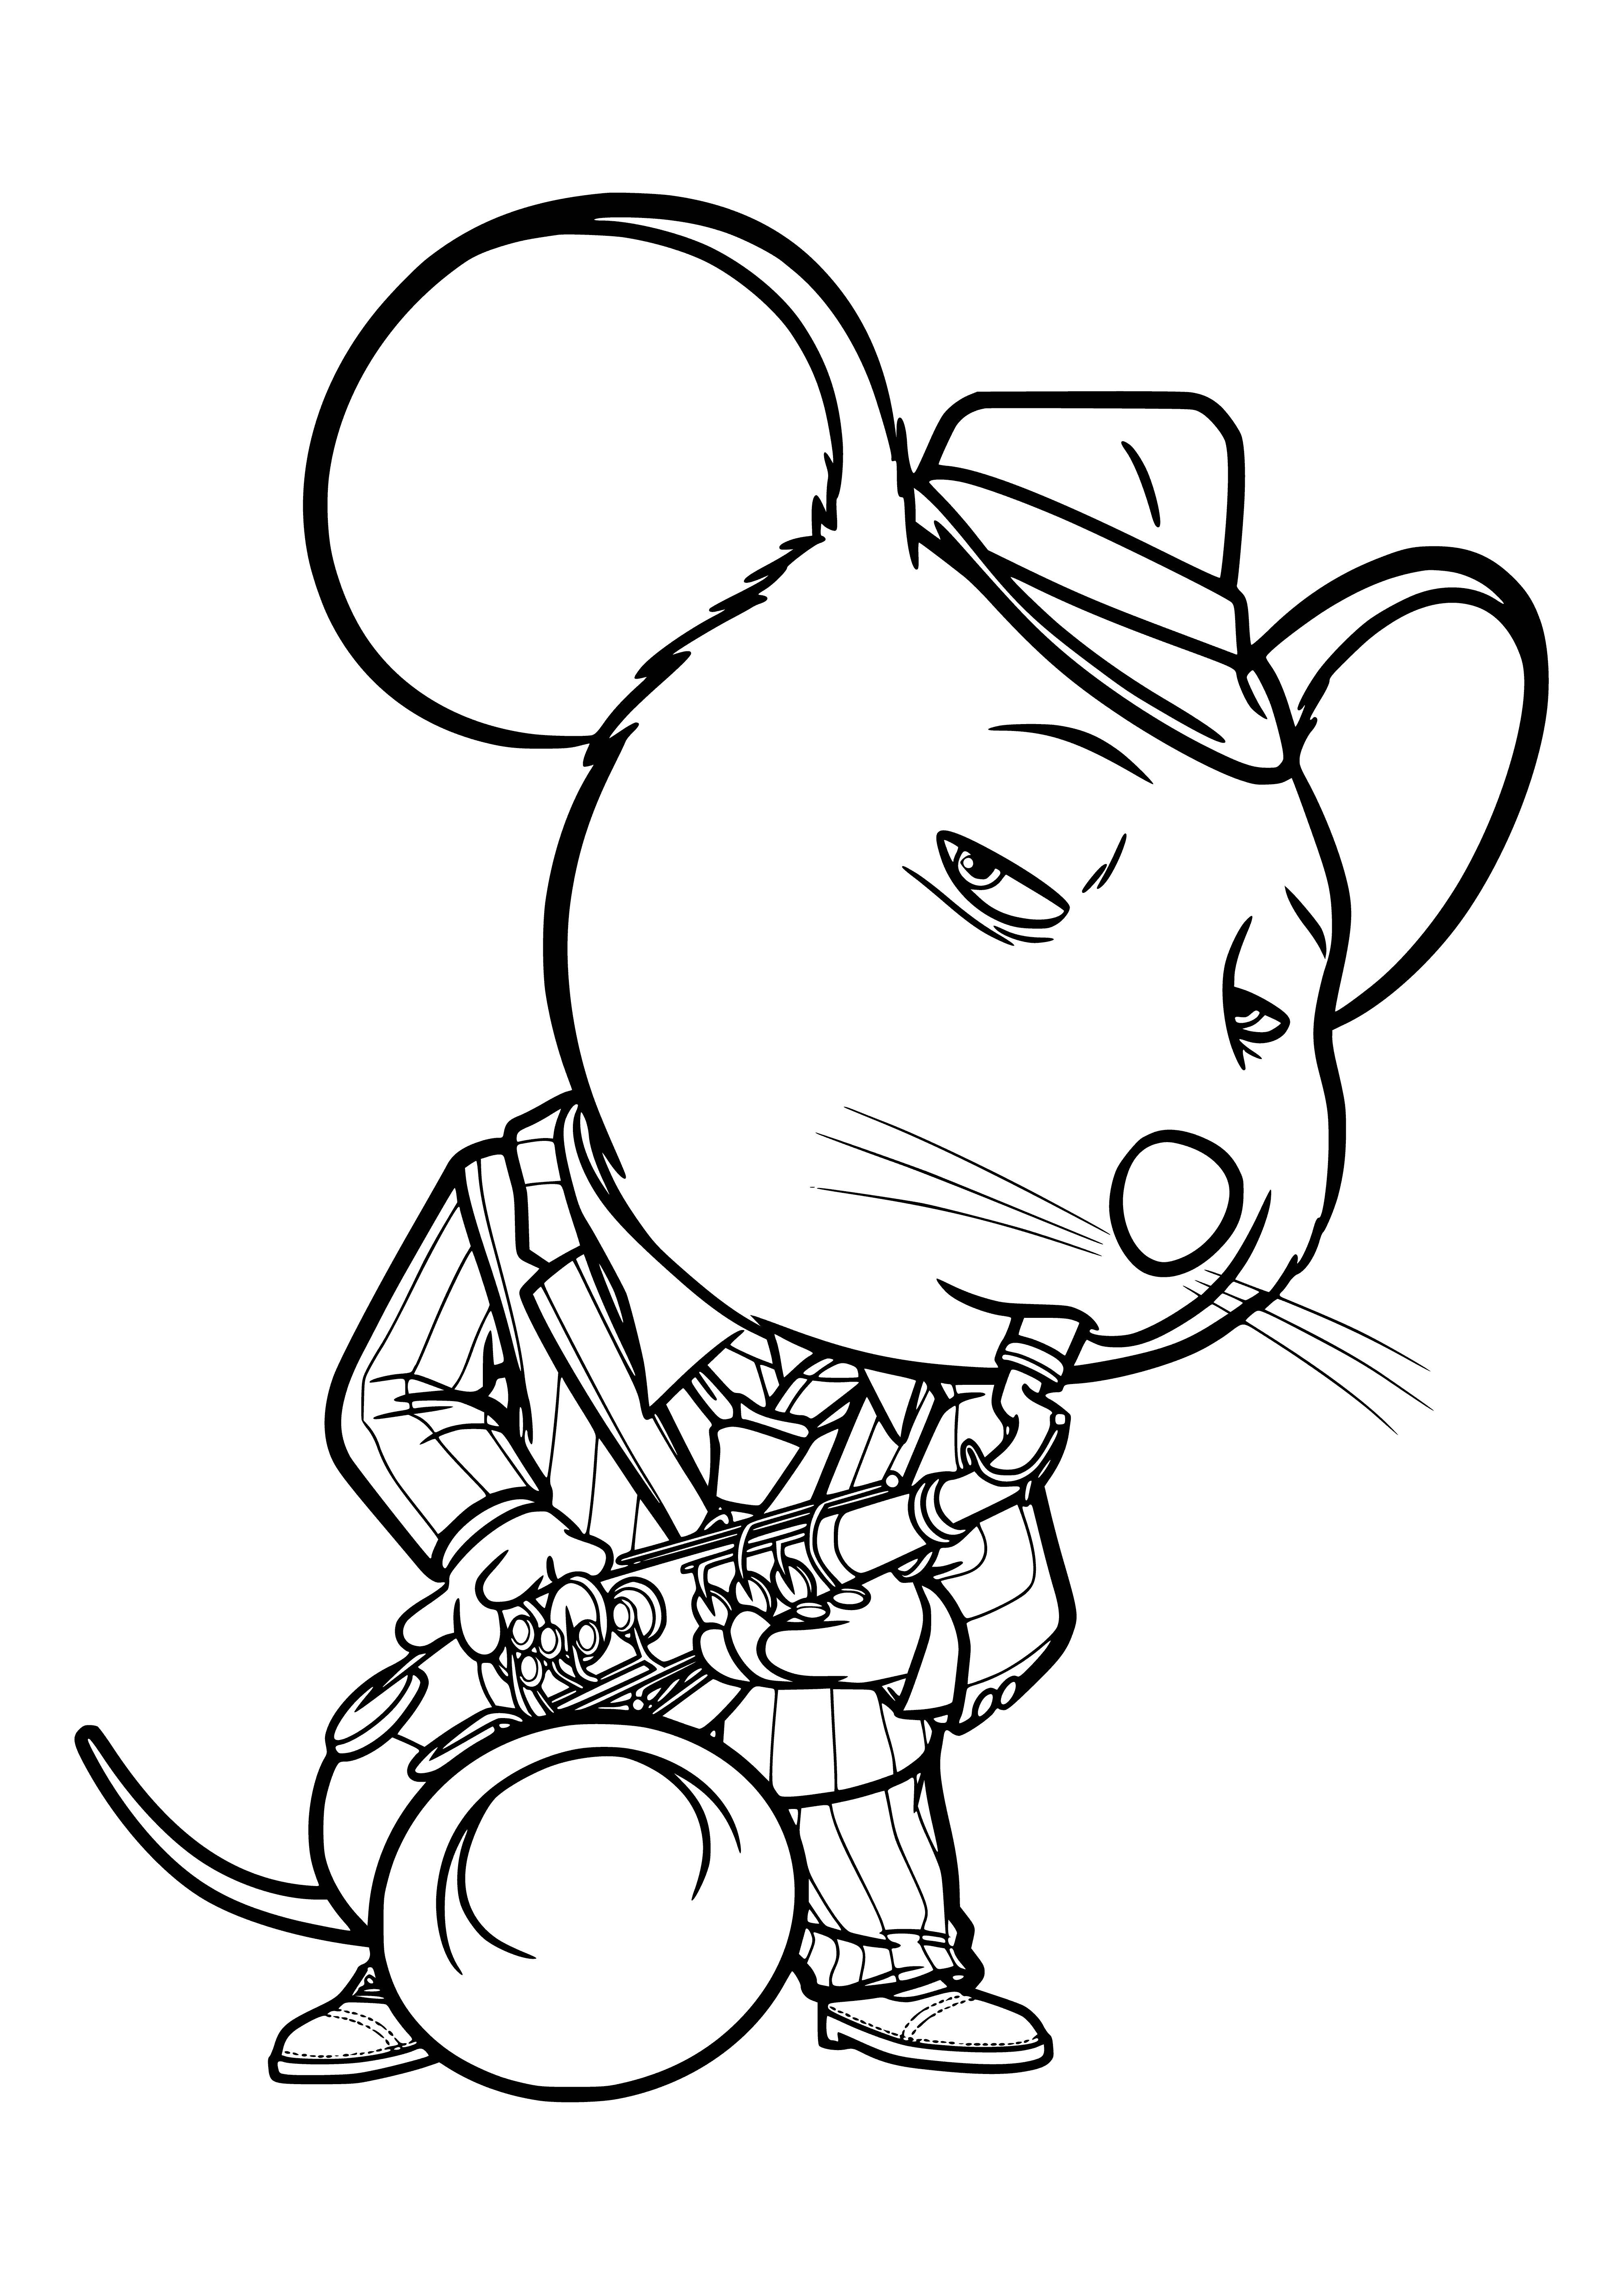 Mouse Mike coloring page